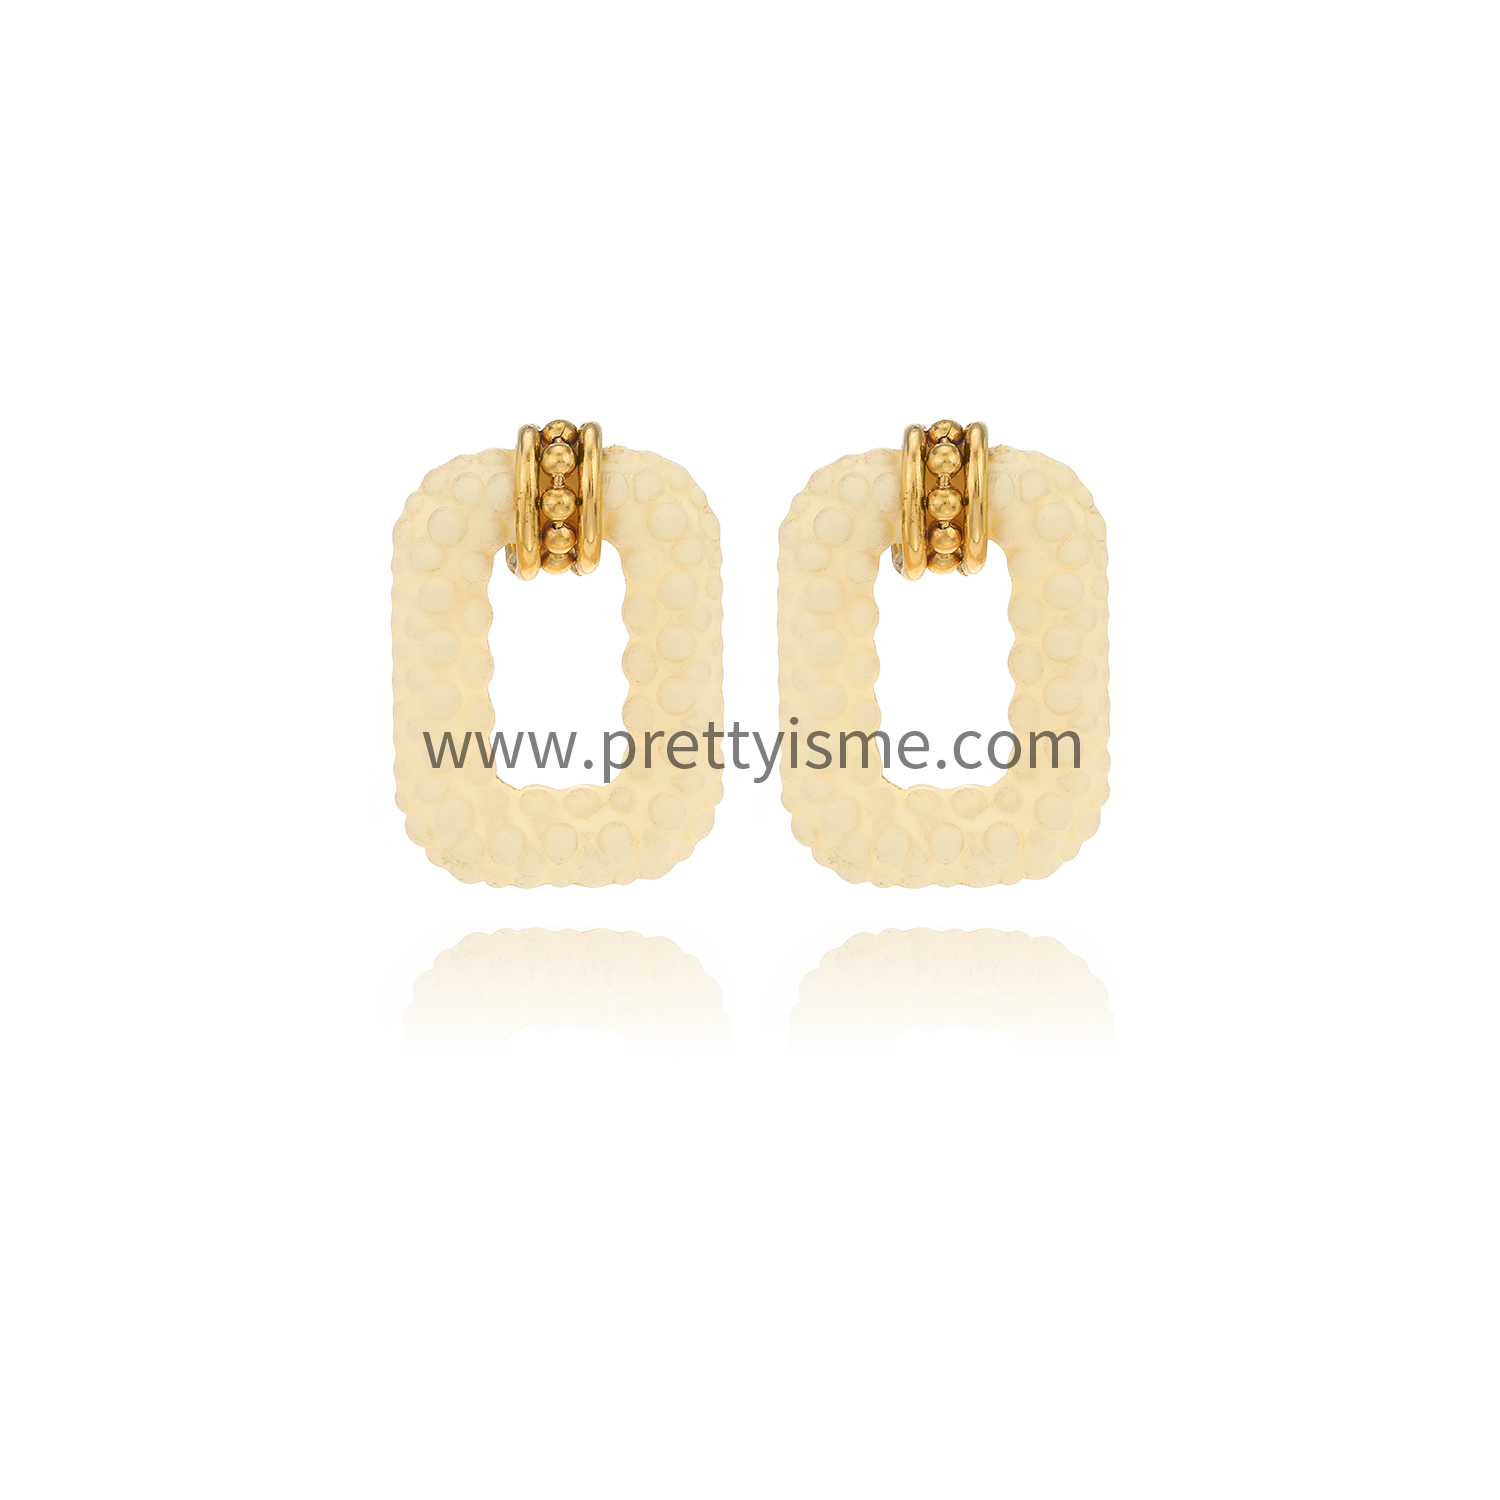 White Square Stainless Steel Earrings with Speckled 18K Gold Plated and Small Gold Beads (5).webp